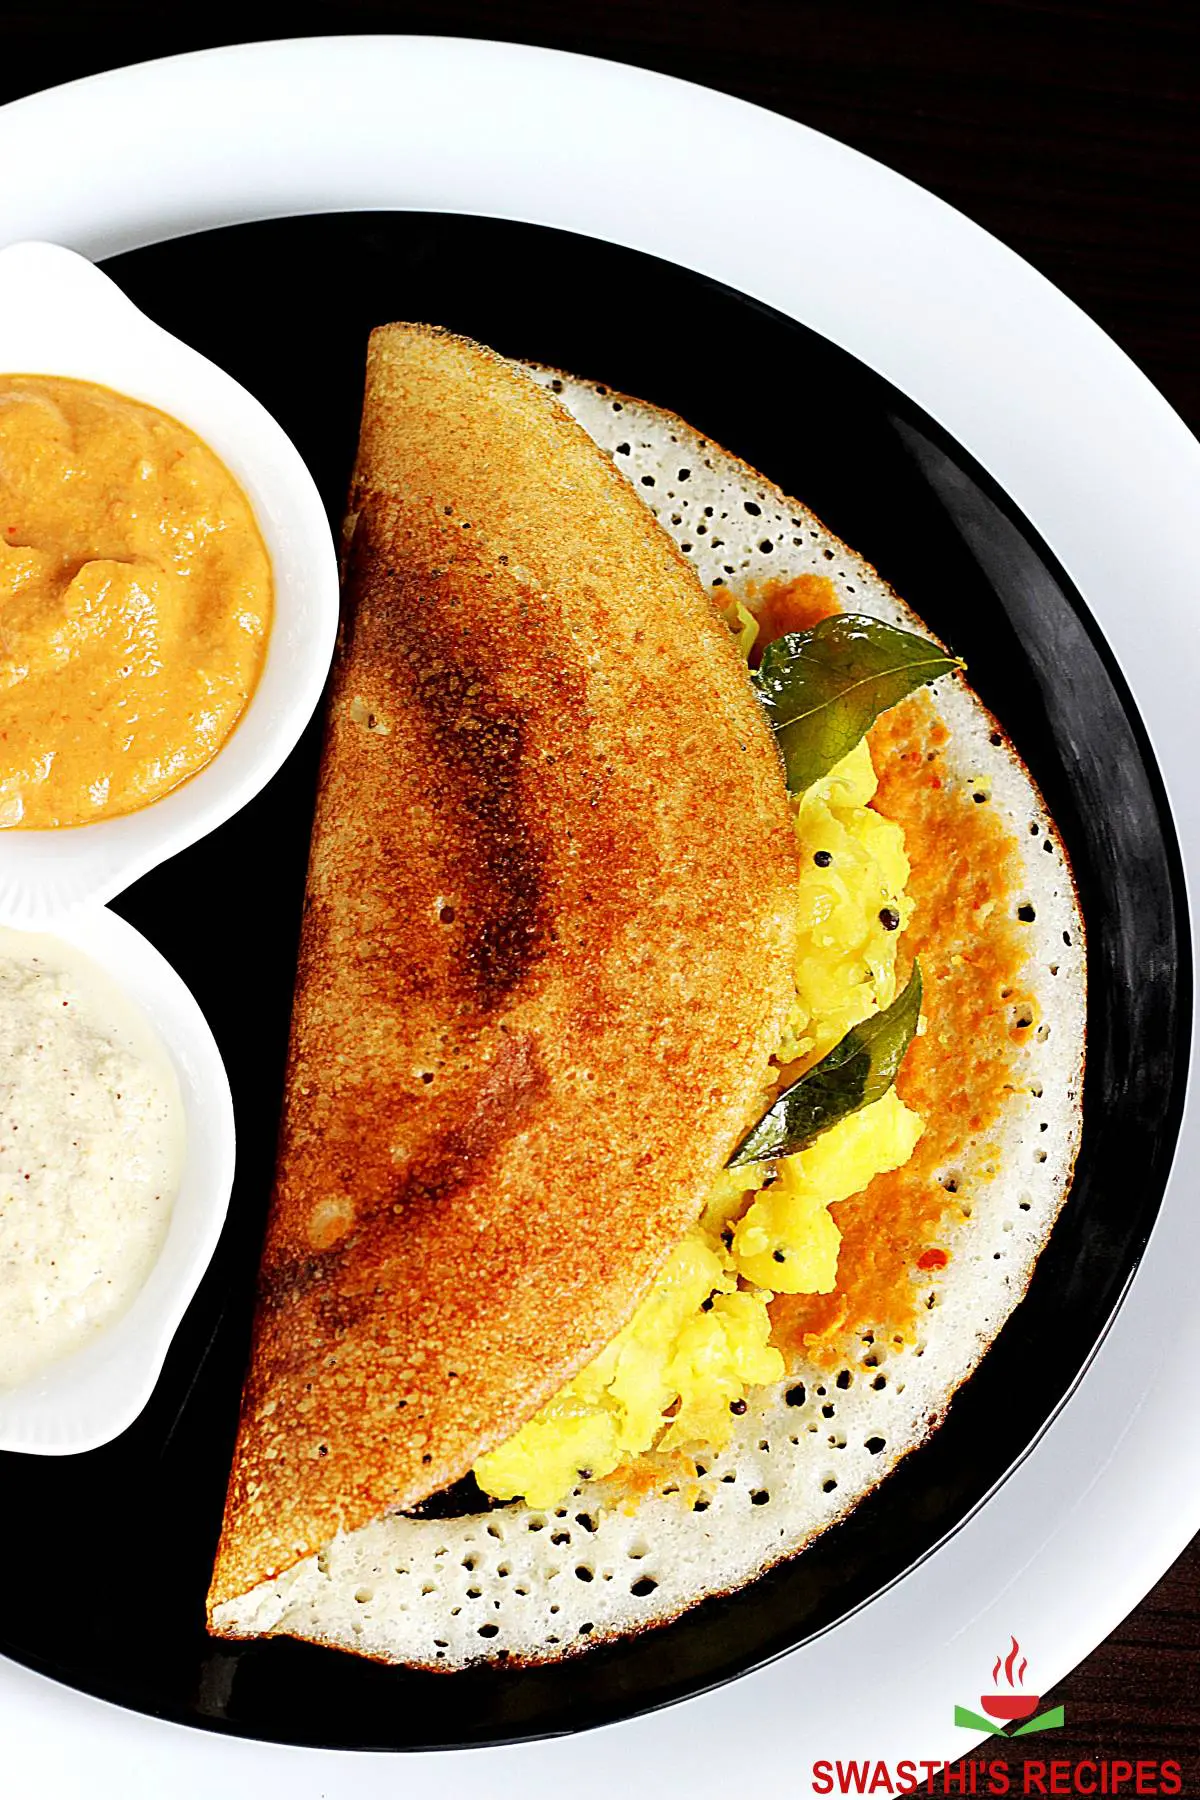 BEST DOSA TAWAS IN INDIA: 7 OPTIONS TESTED